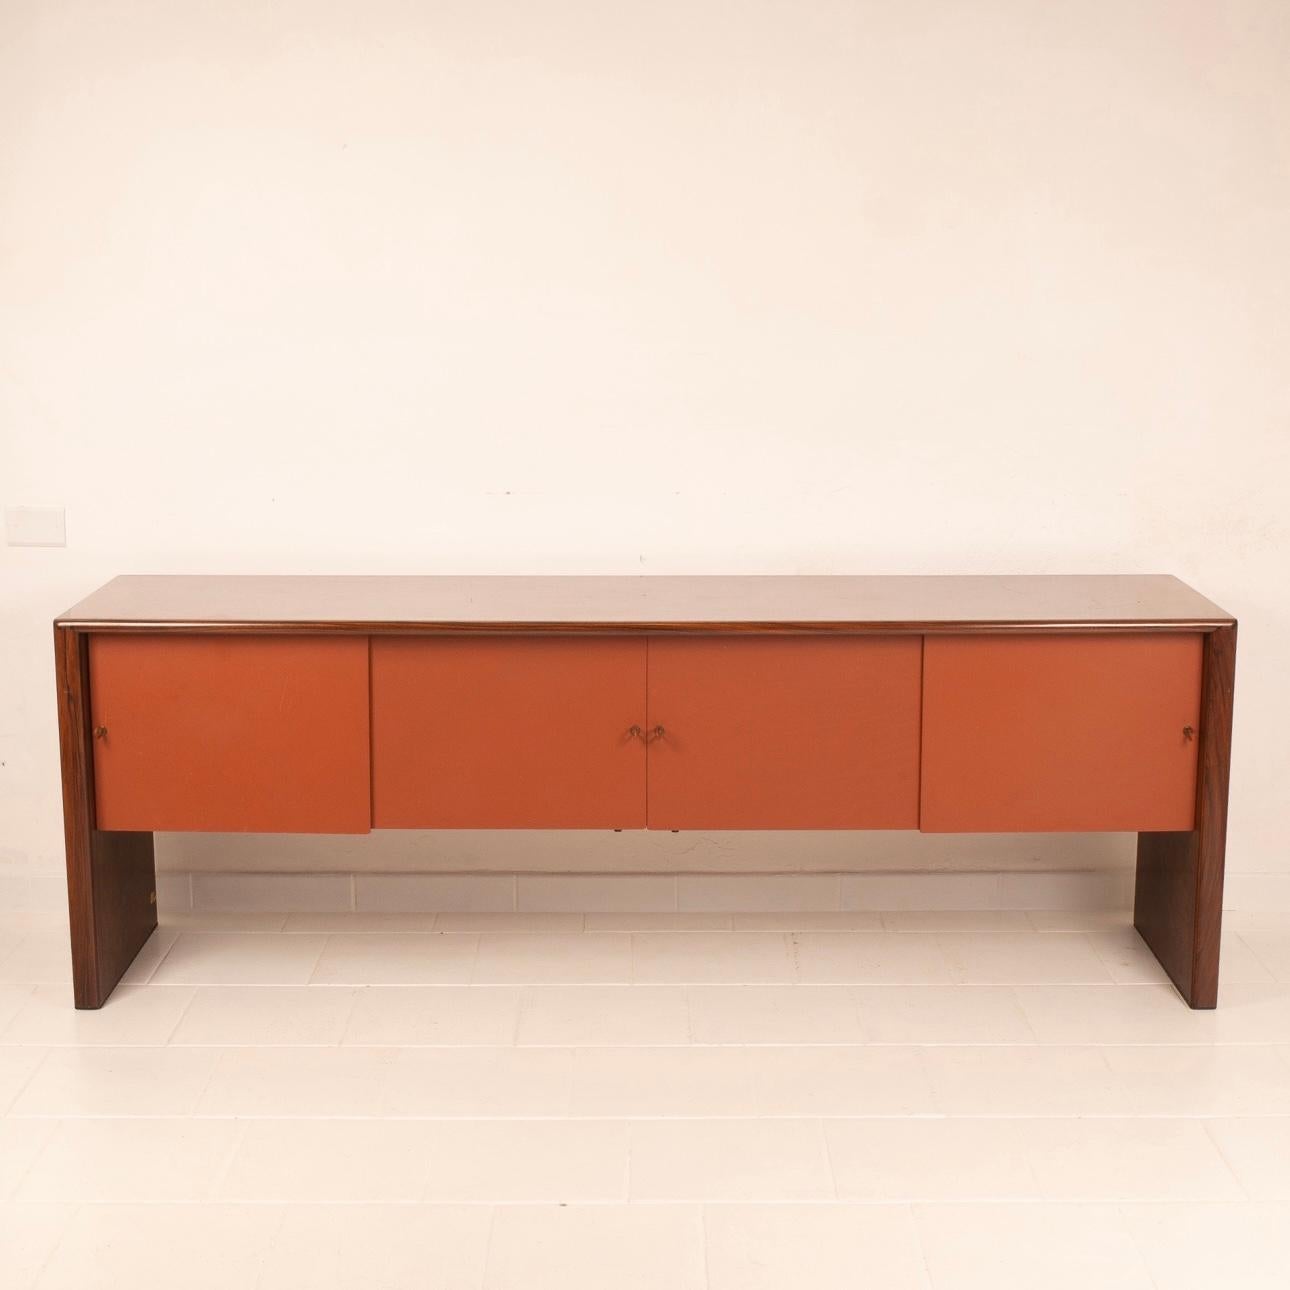 Extraordinary and rare version of the sideboard or console table belonging to the Artona series, model Africa, designed by Afra and Tobia Scarpa  and produced by Maxalto in the 1970s.
Rare edition with all profiles in solid plywood of ebony and